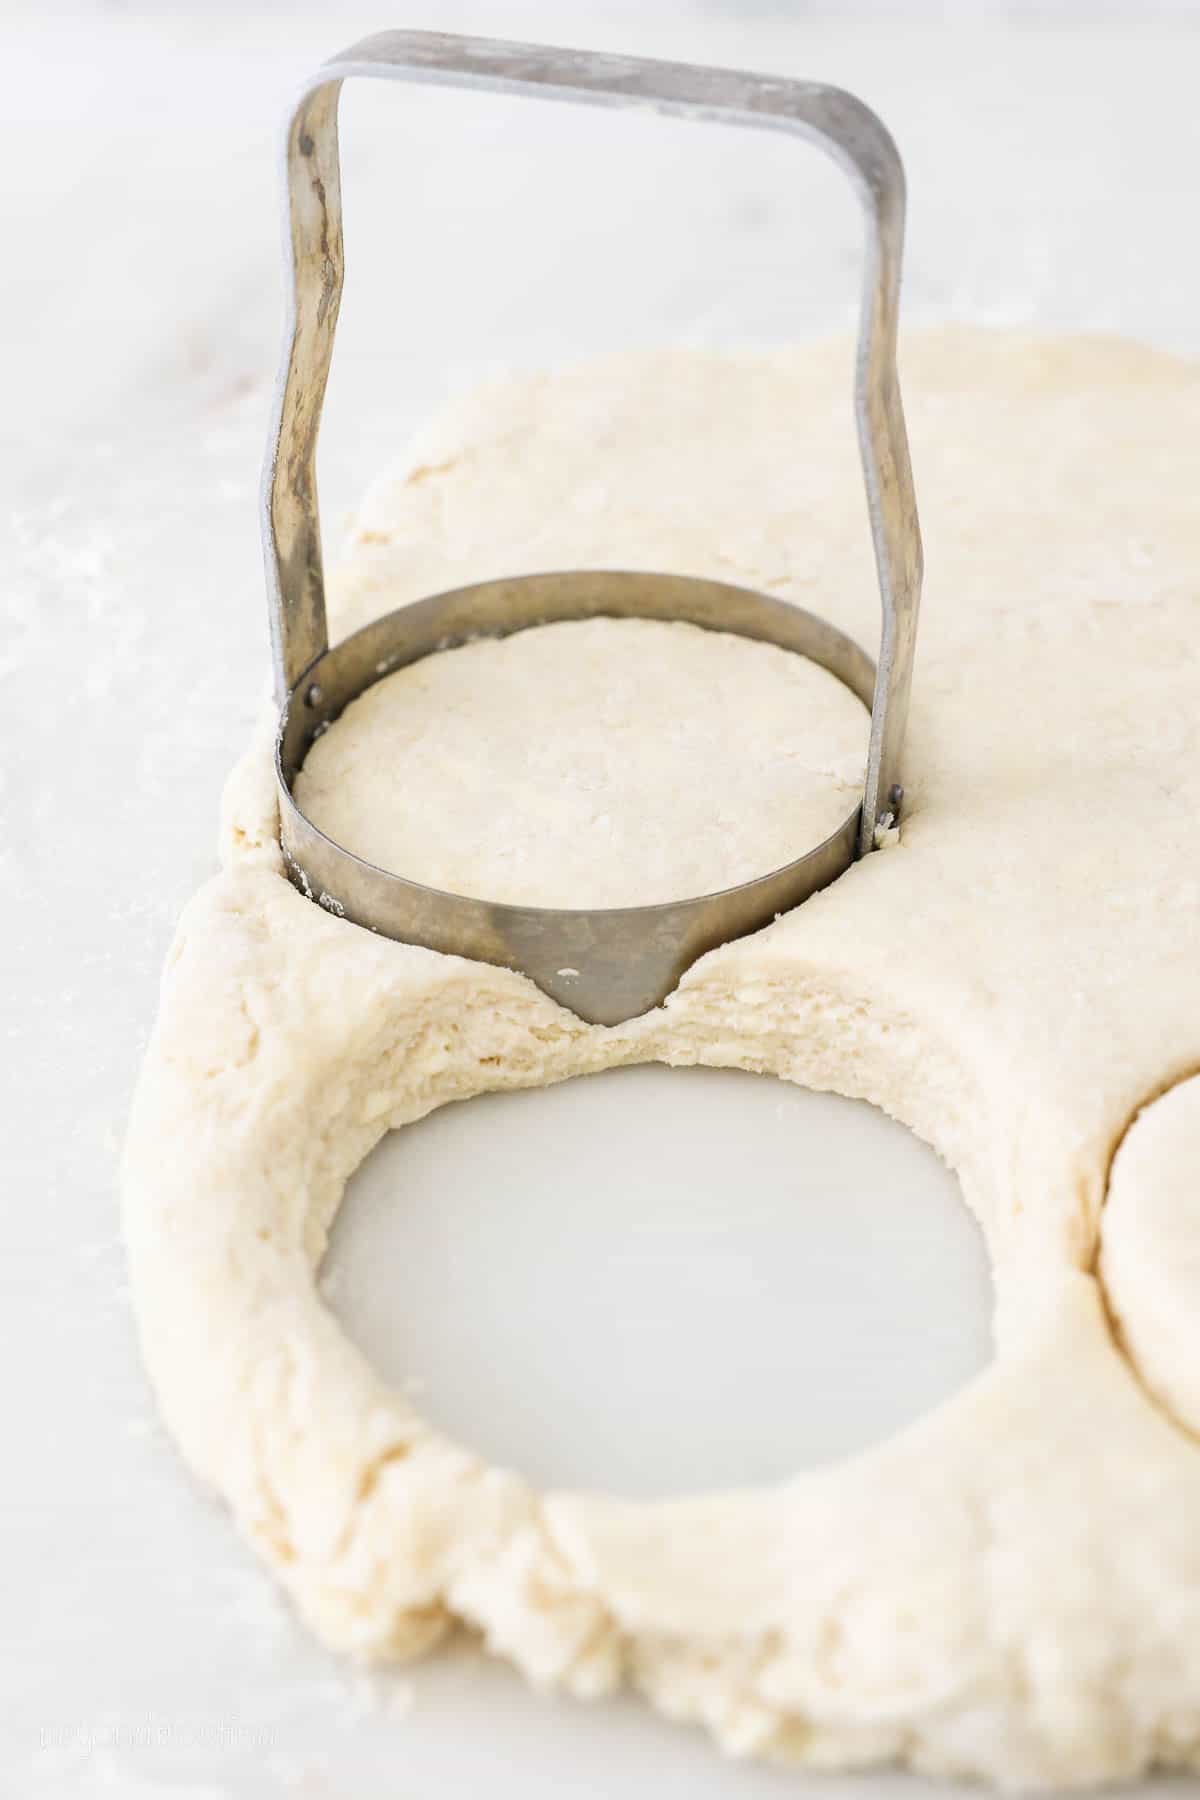 Round metal biscuit cutter cuts Buttermilk Biscuit shapes out of dough.